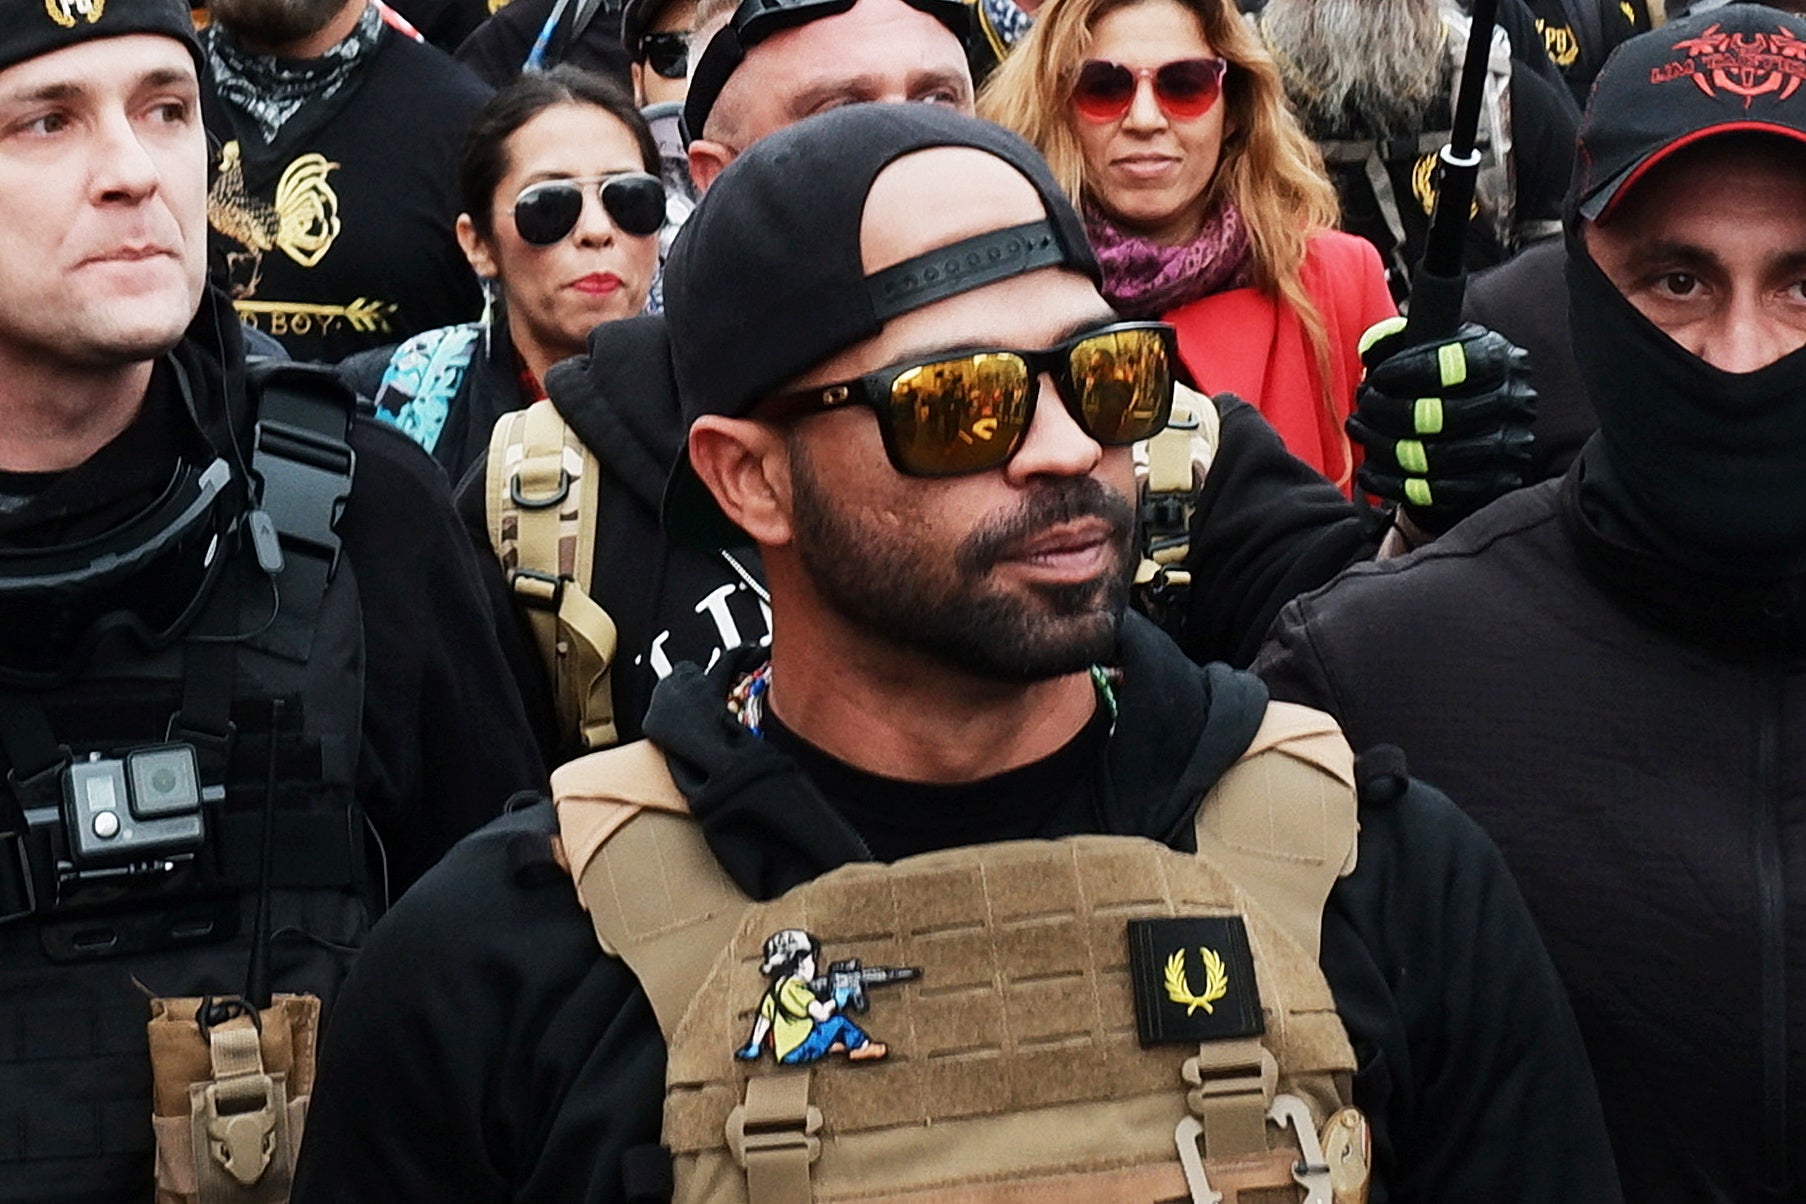 Proud Boys leader Enrique Tarrio, pictured on 12 December, was arrested in Washington DC on 4 January on destruction of property charges. He also was in possession of two high-capacity firearm magazines, unloaded.